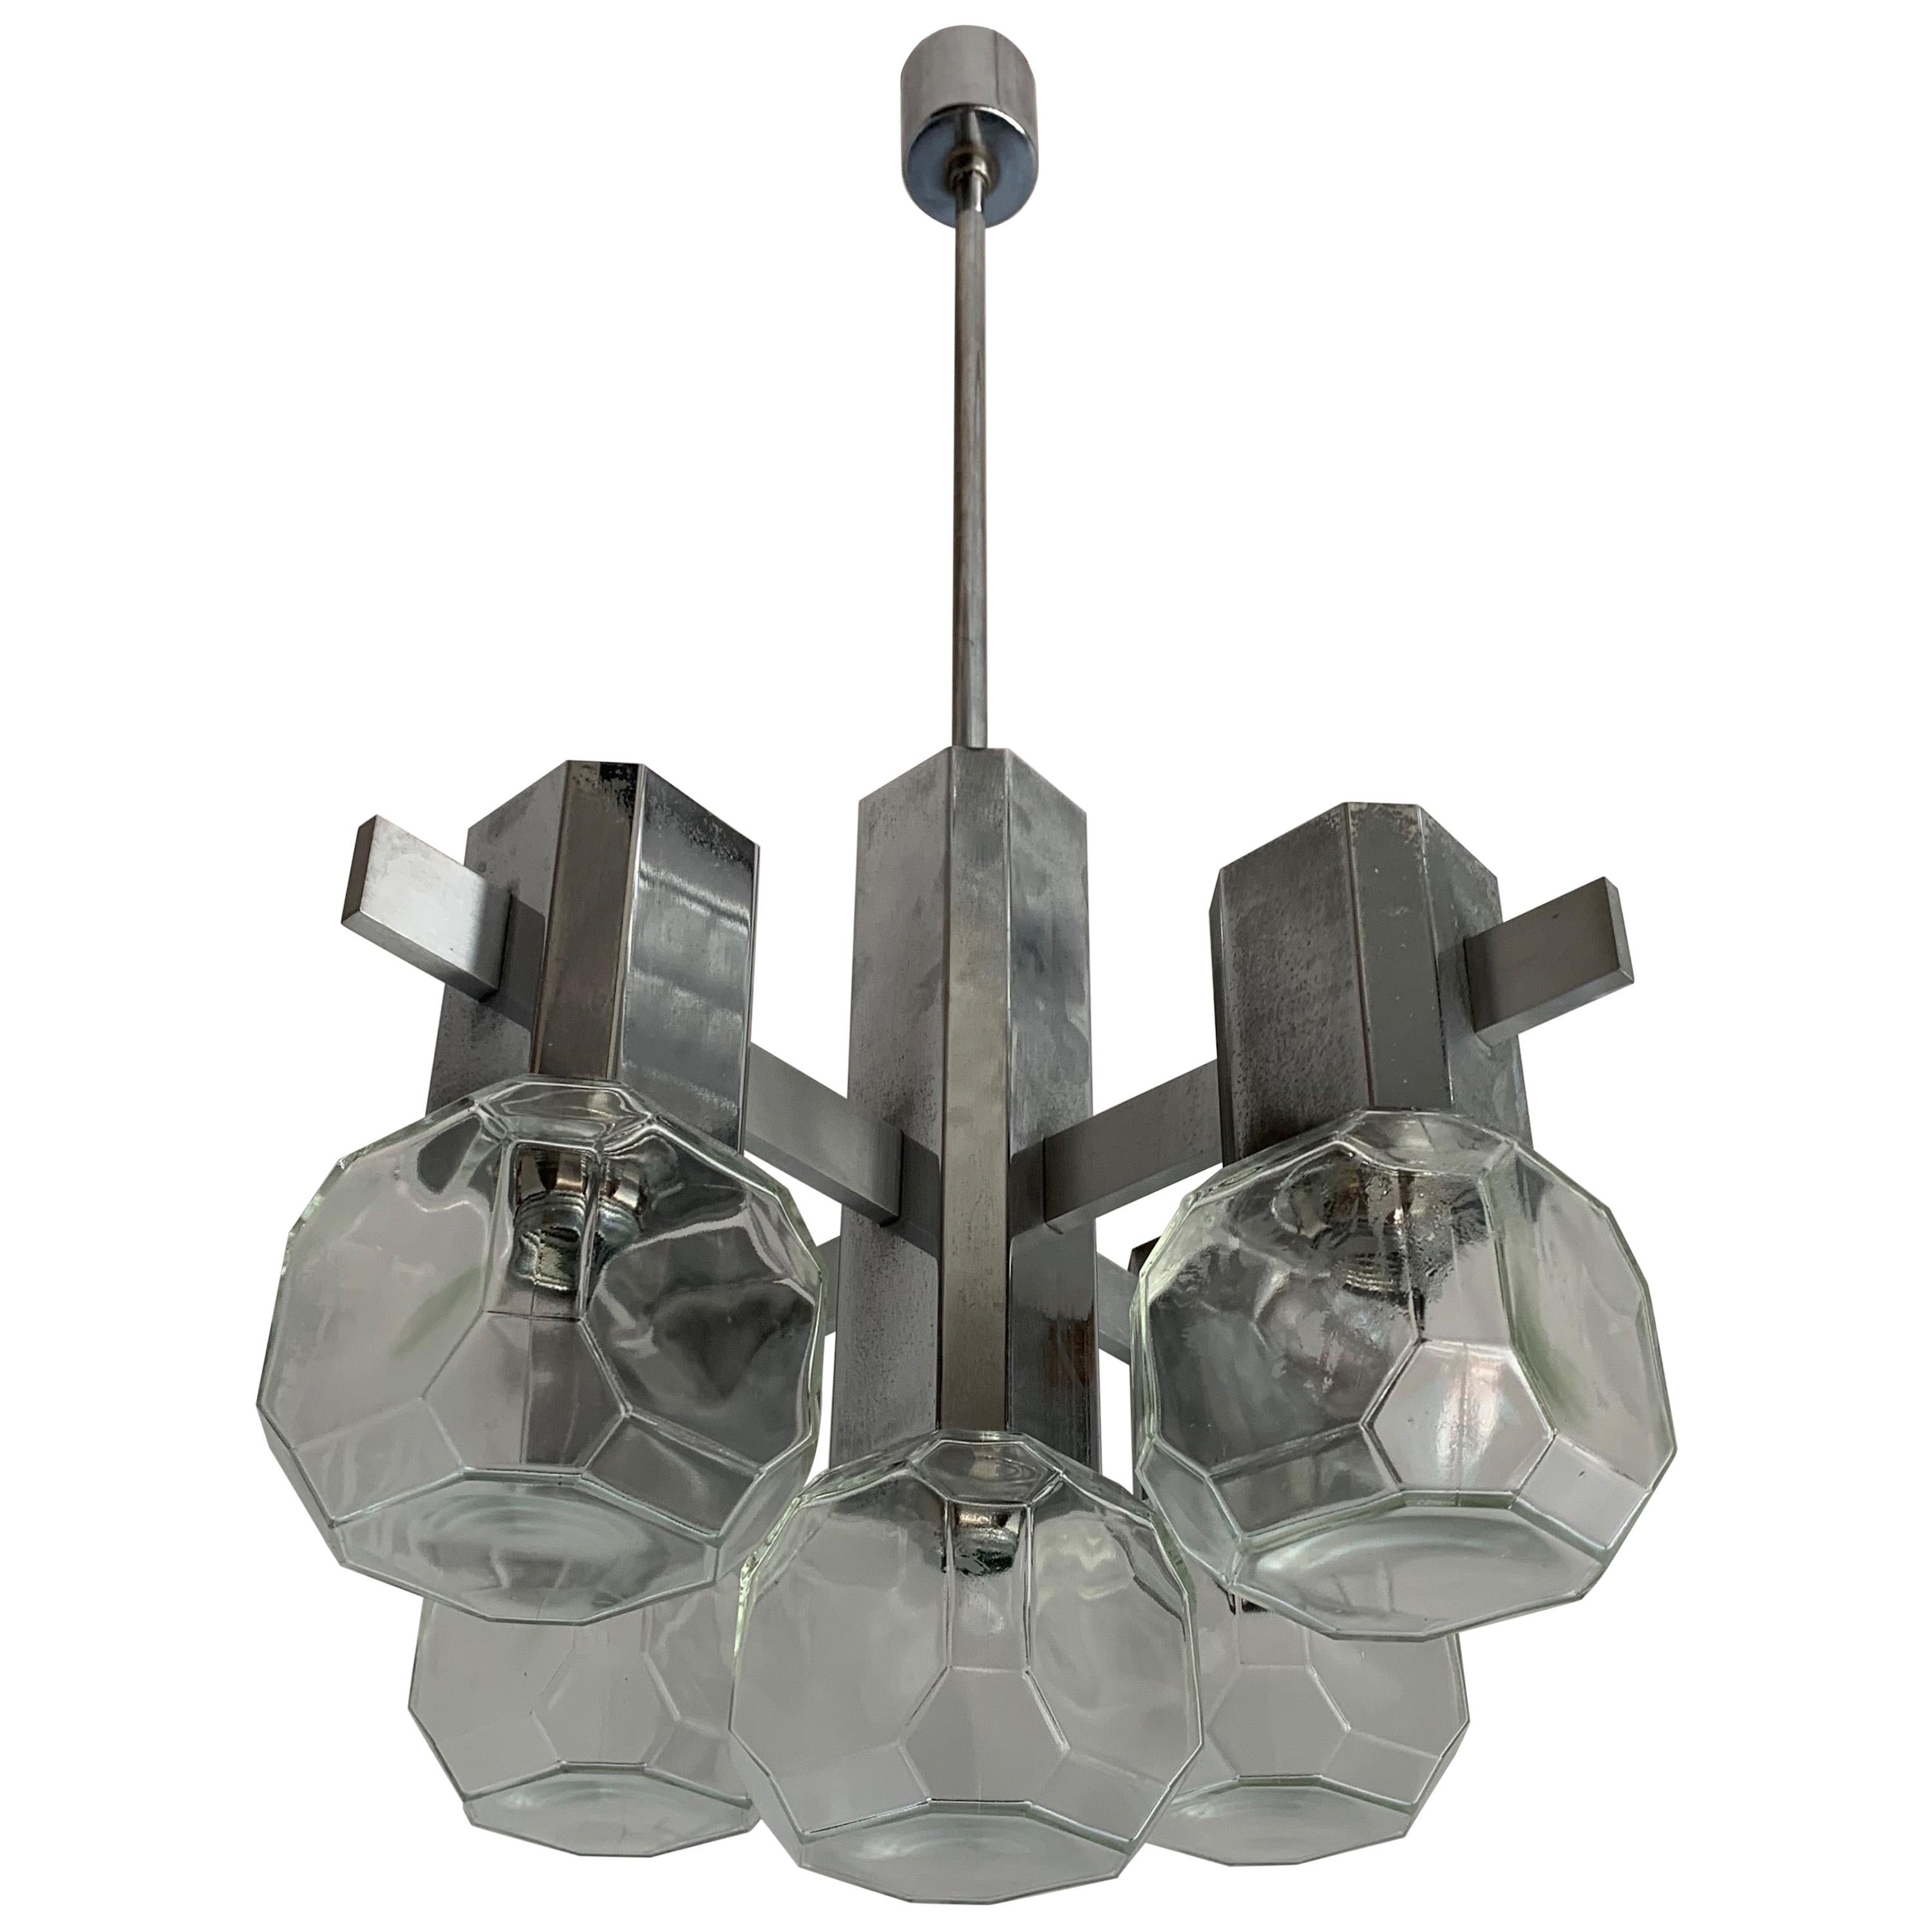 Mid-Century Modern Chrome Metal Pendant Light with Cubical Design Glass Shades For Sale